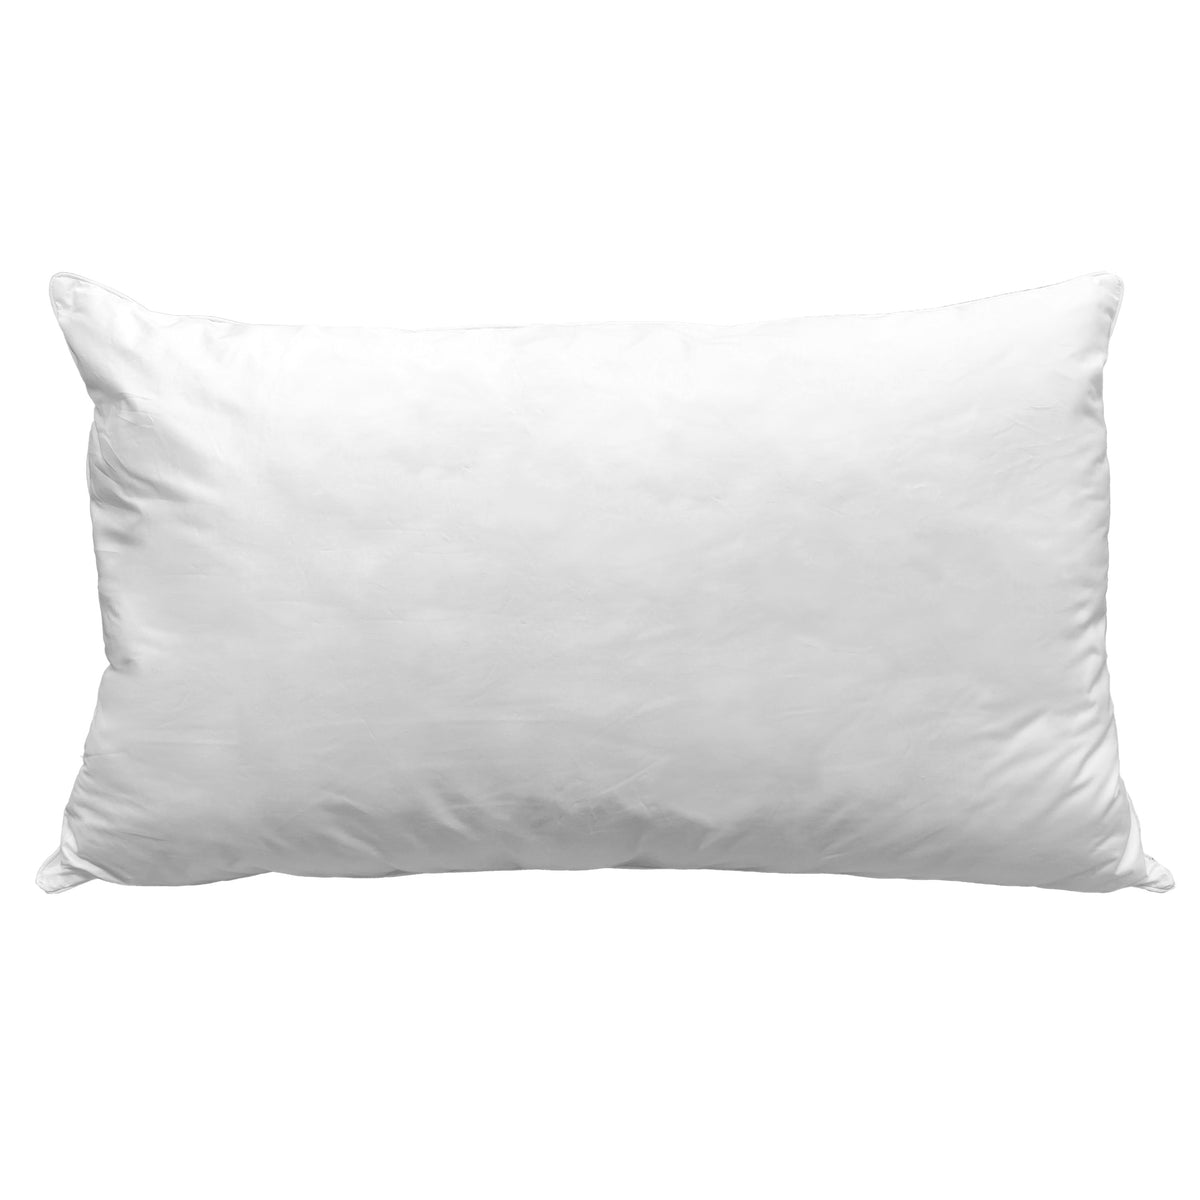 Pillow in recycled fiber - Aerelle Blue